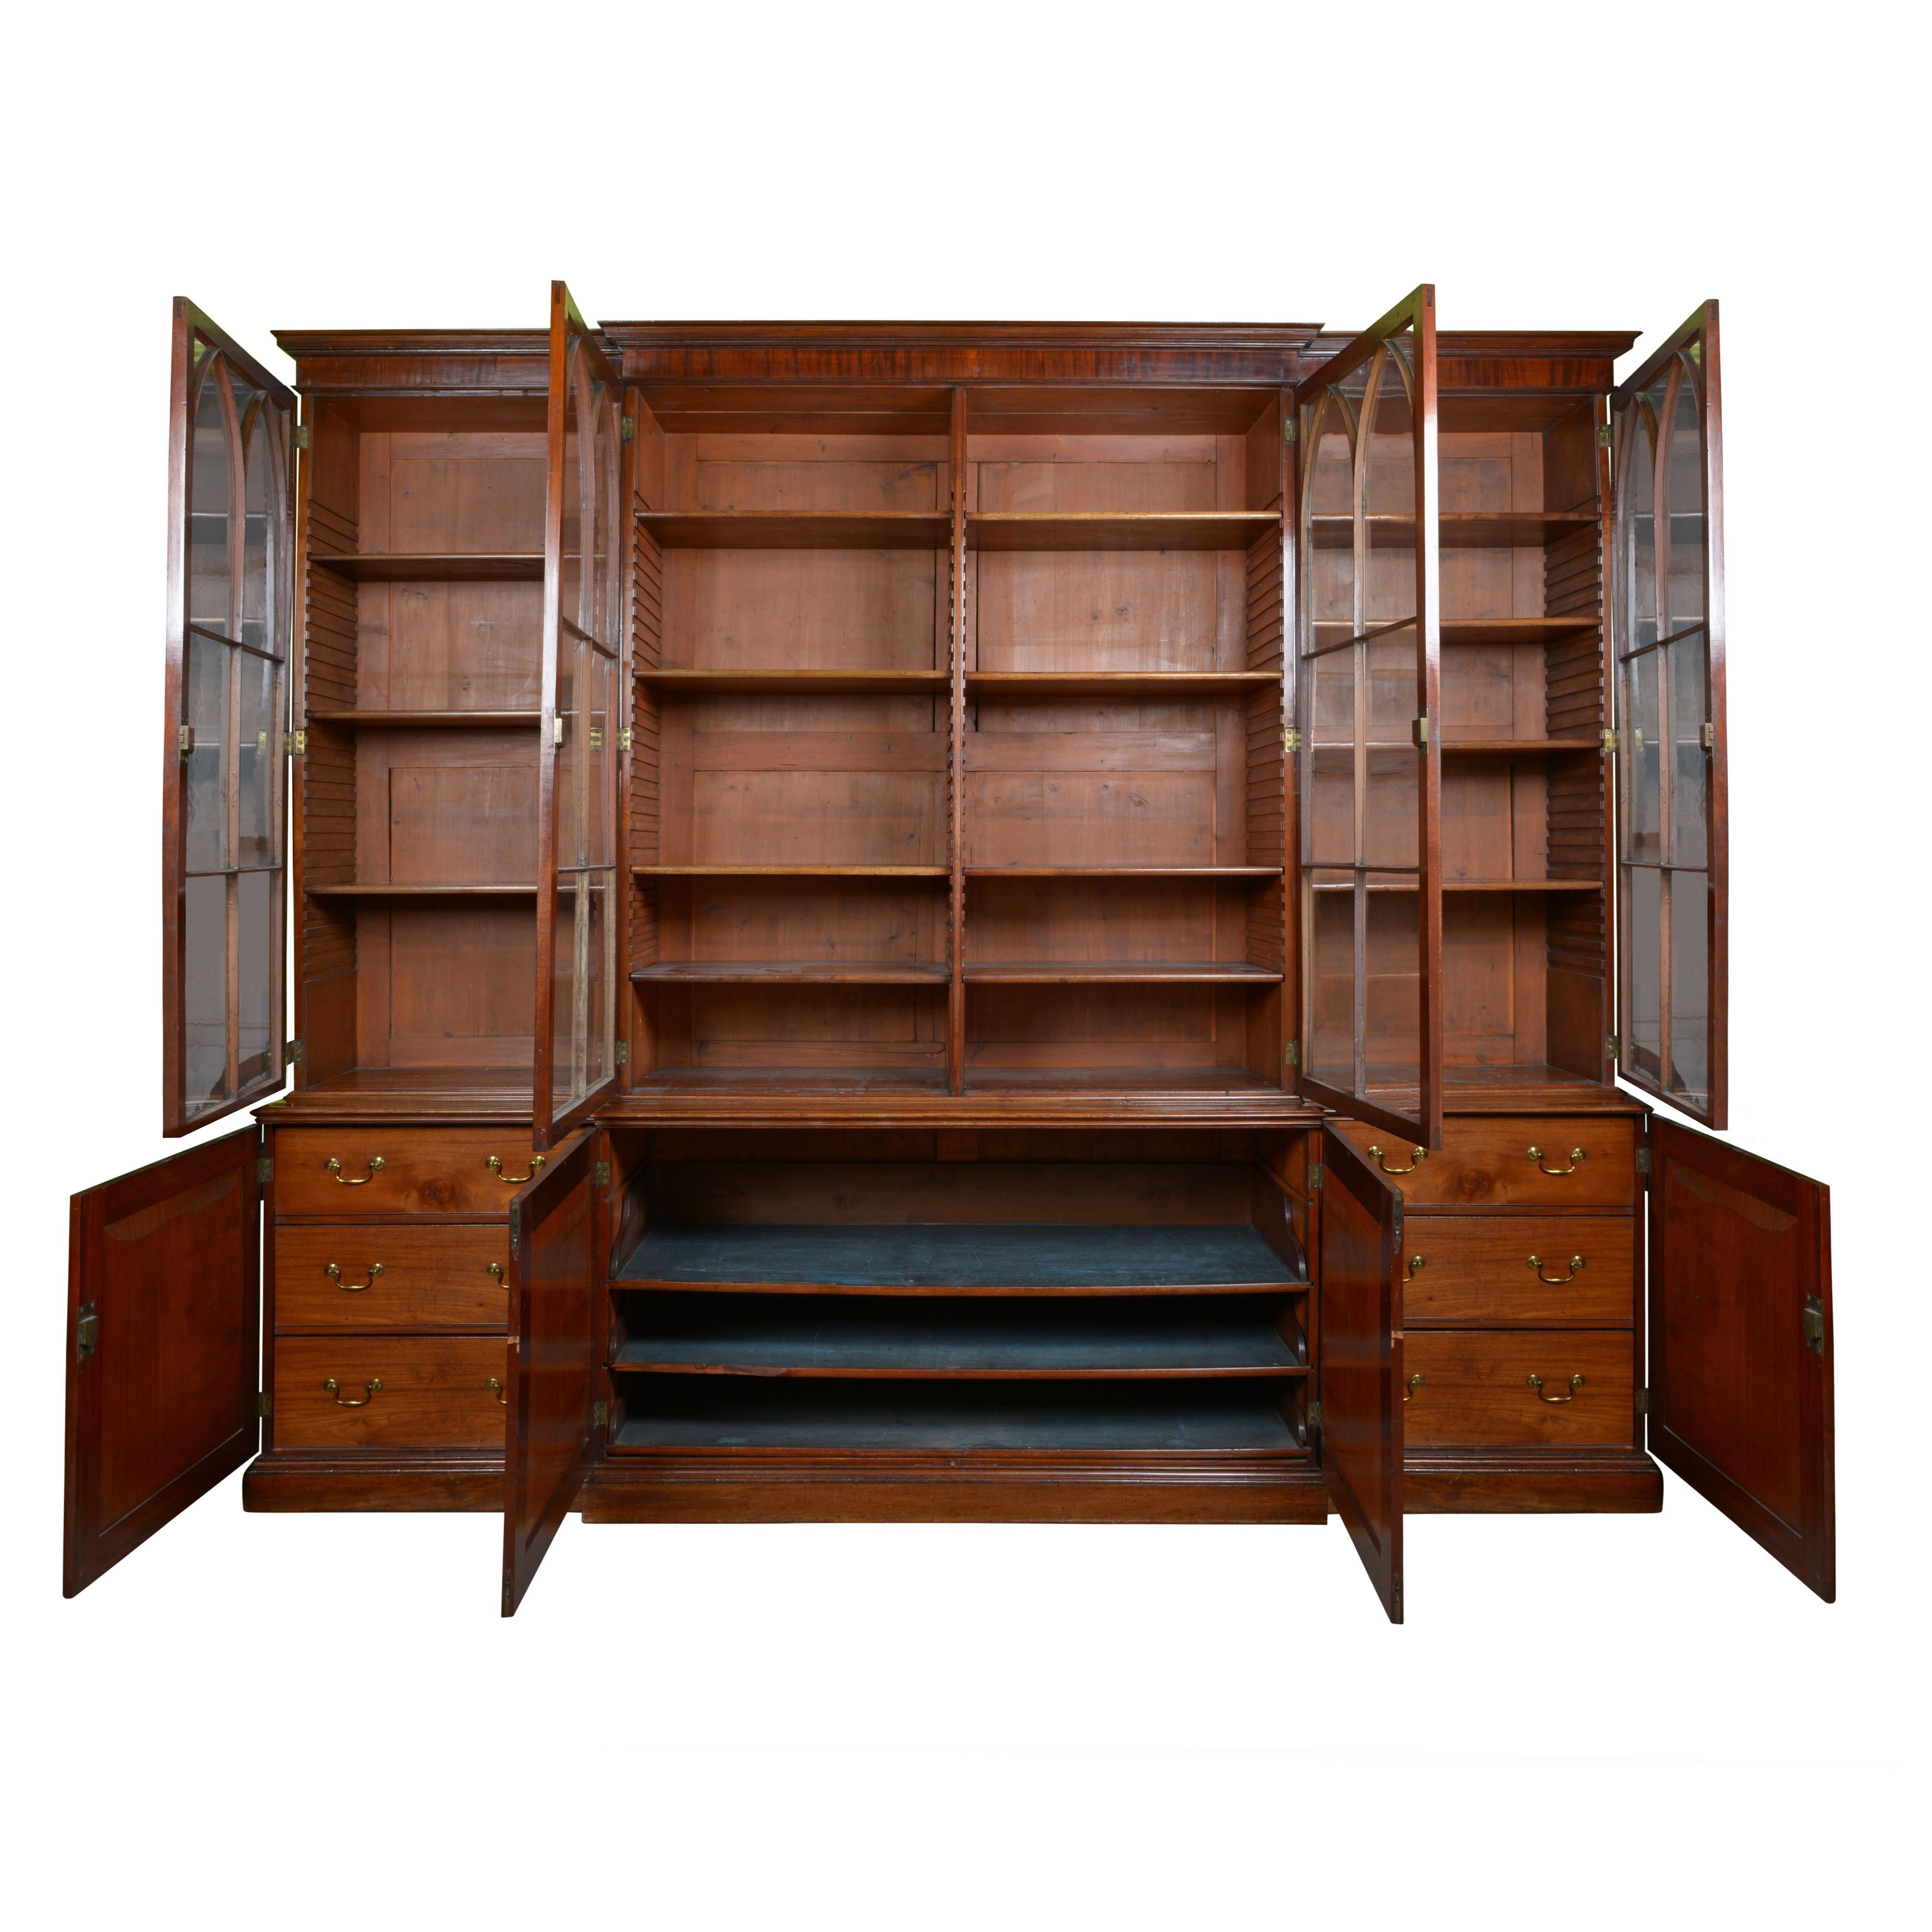 The upper section with four glass front doors opening to adjustable shelves; the lower part fitted with paneled doors opening to drawers and sliding trays.